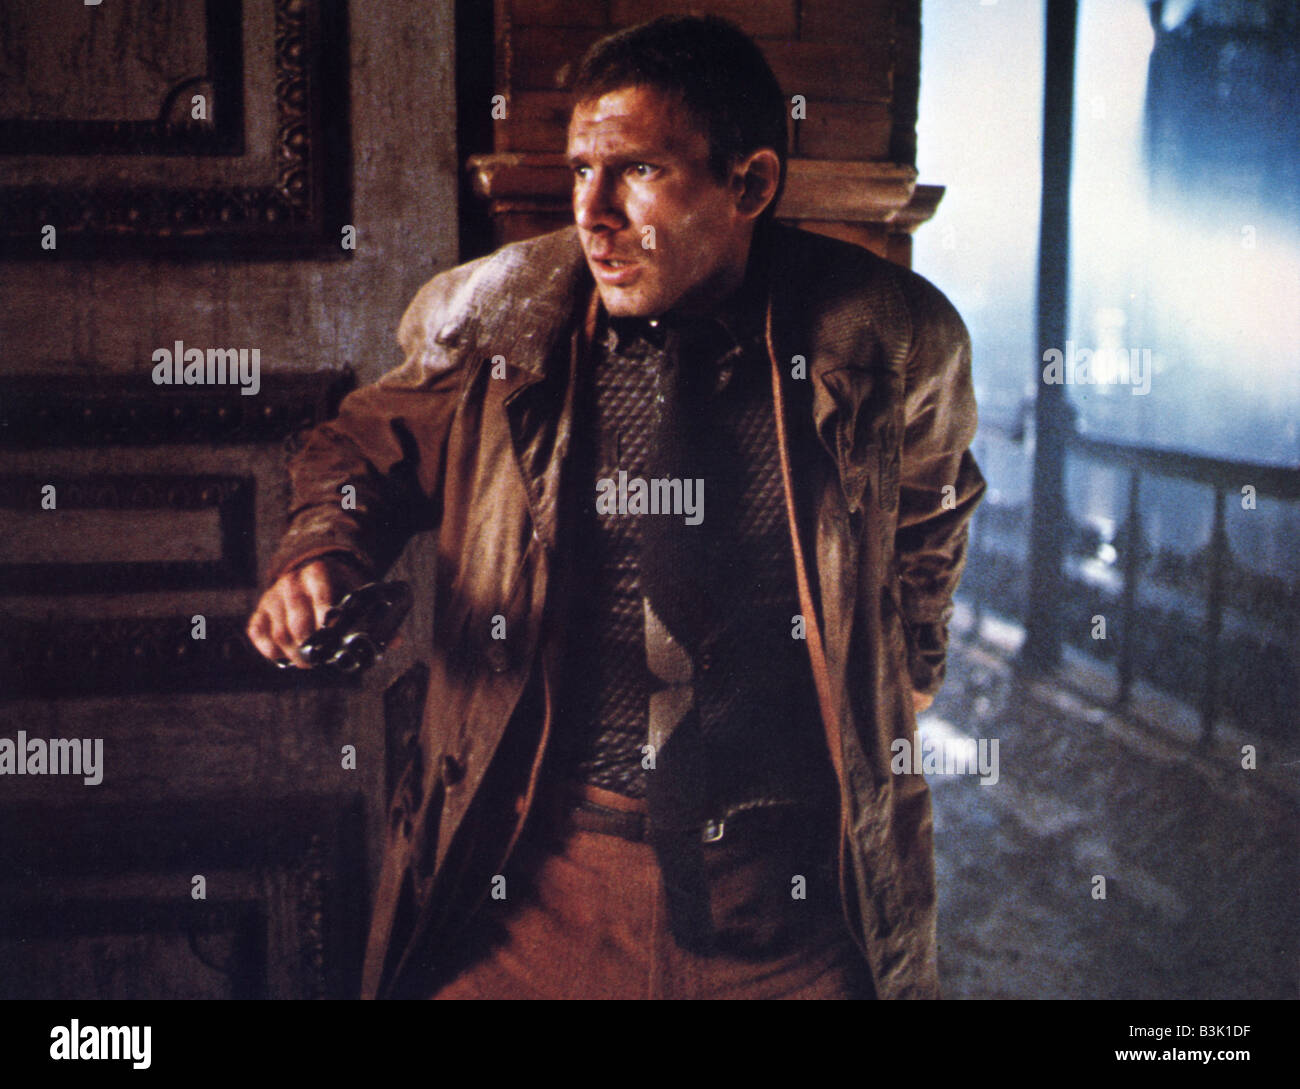 BLADE RUNNER 1982 Warner film with Harrison Ford and directed by Ridley Scott Stock Photo